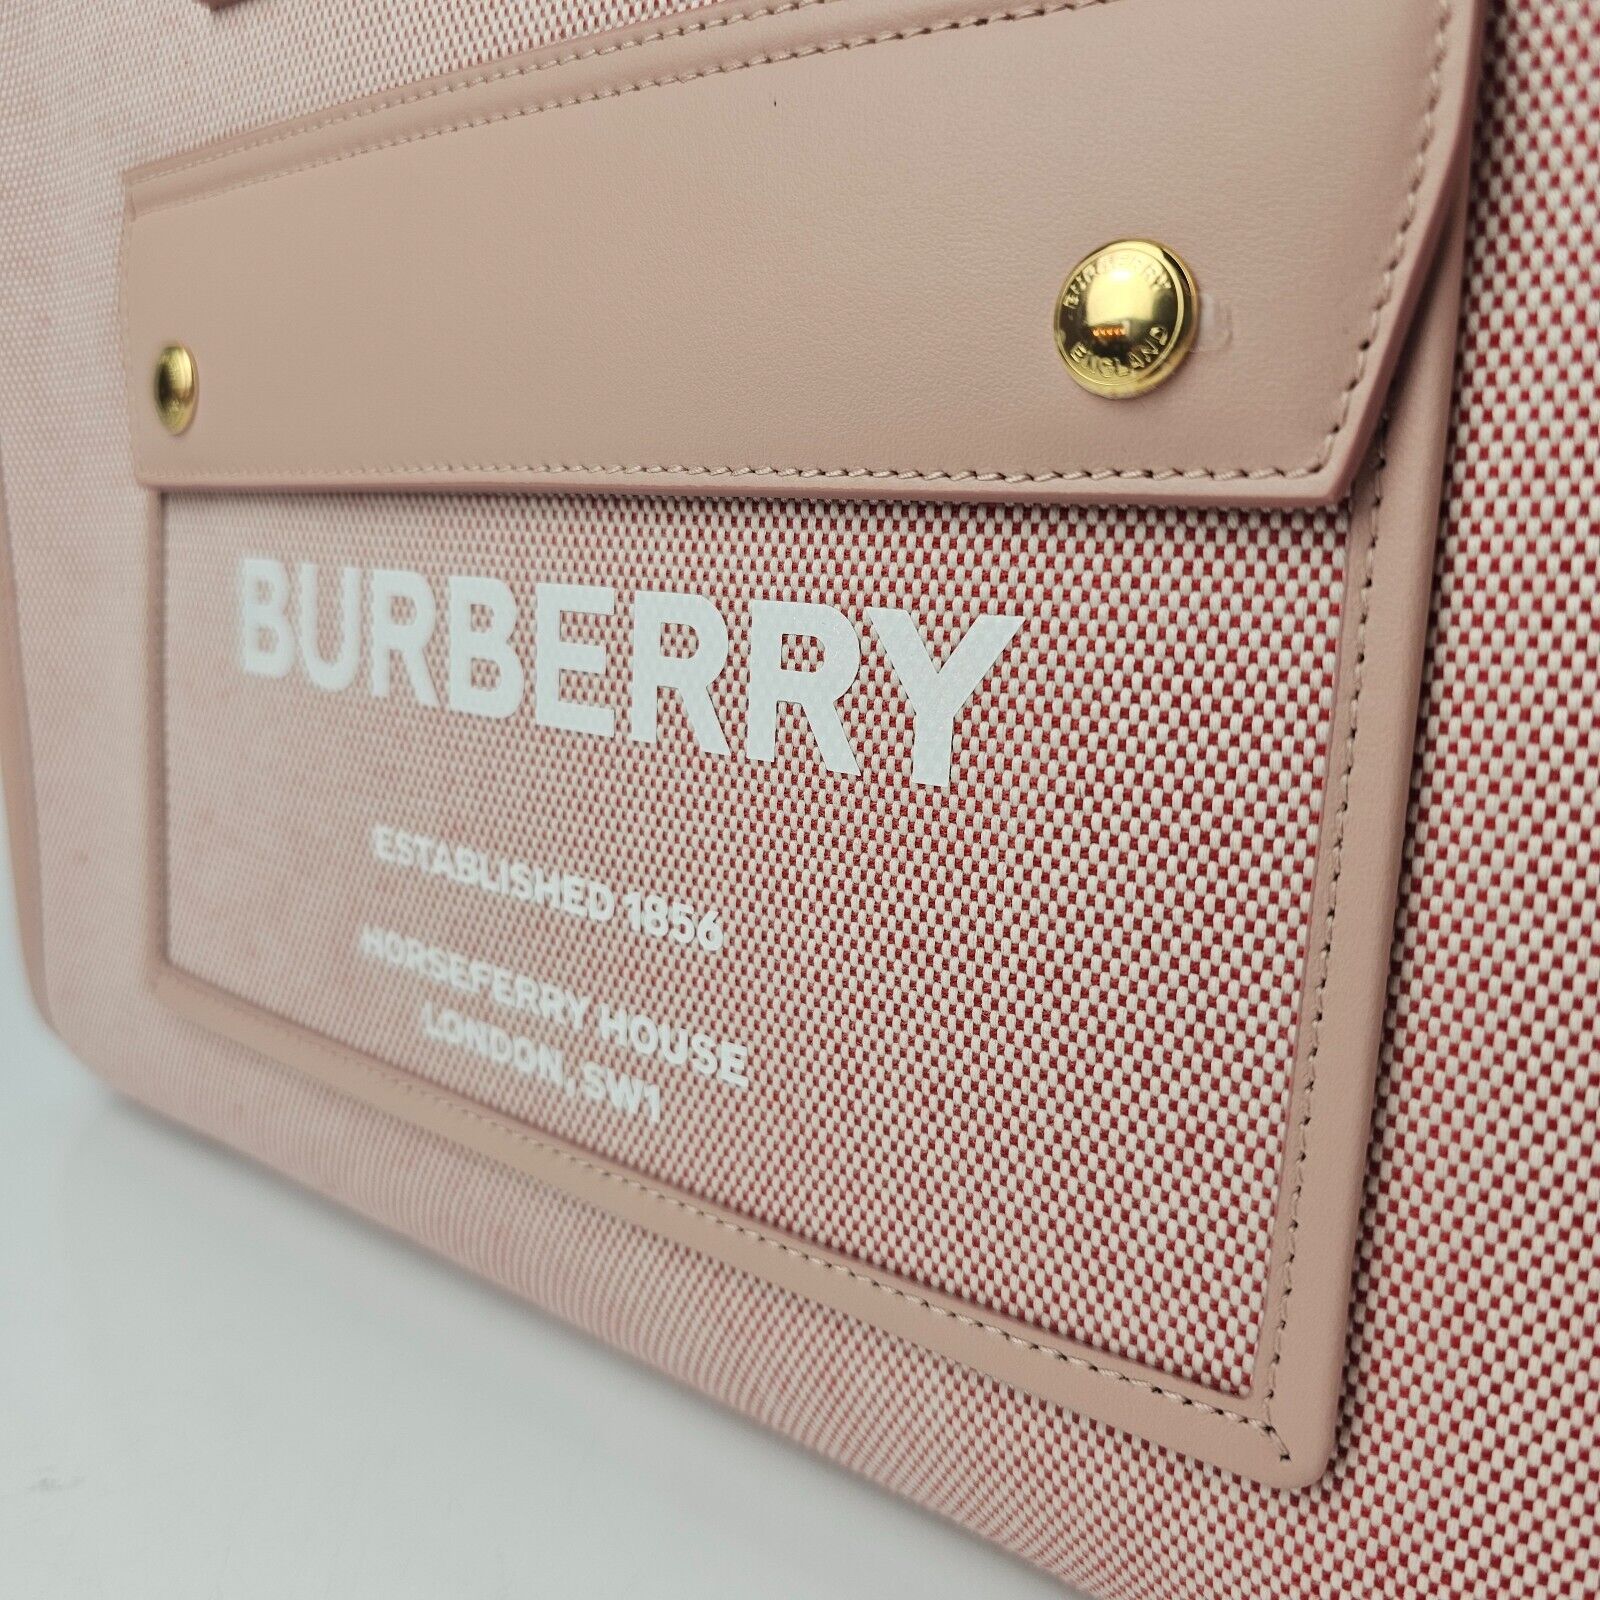 Burberry Small Freya Red/Dusky Pink Leather And Canvas Tote Bag New